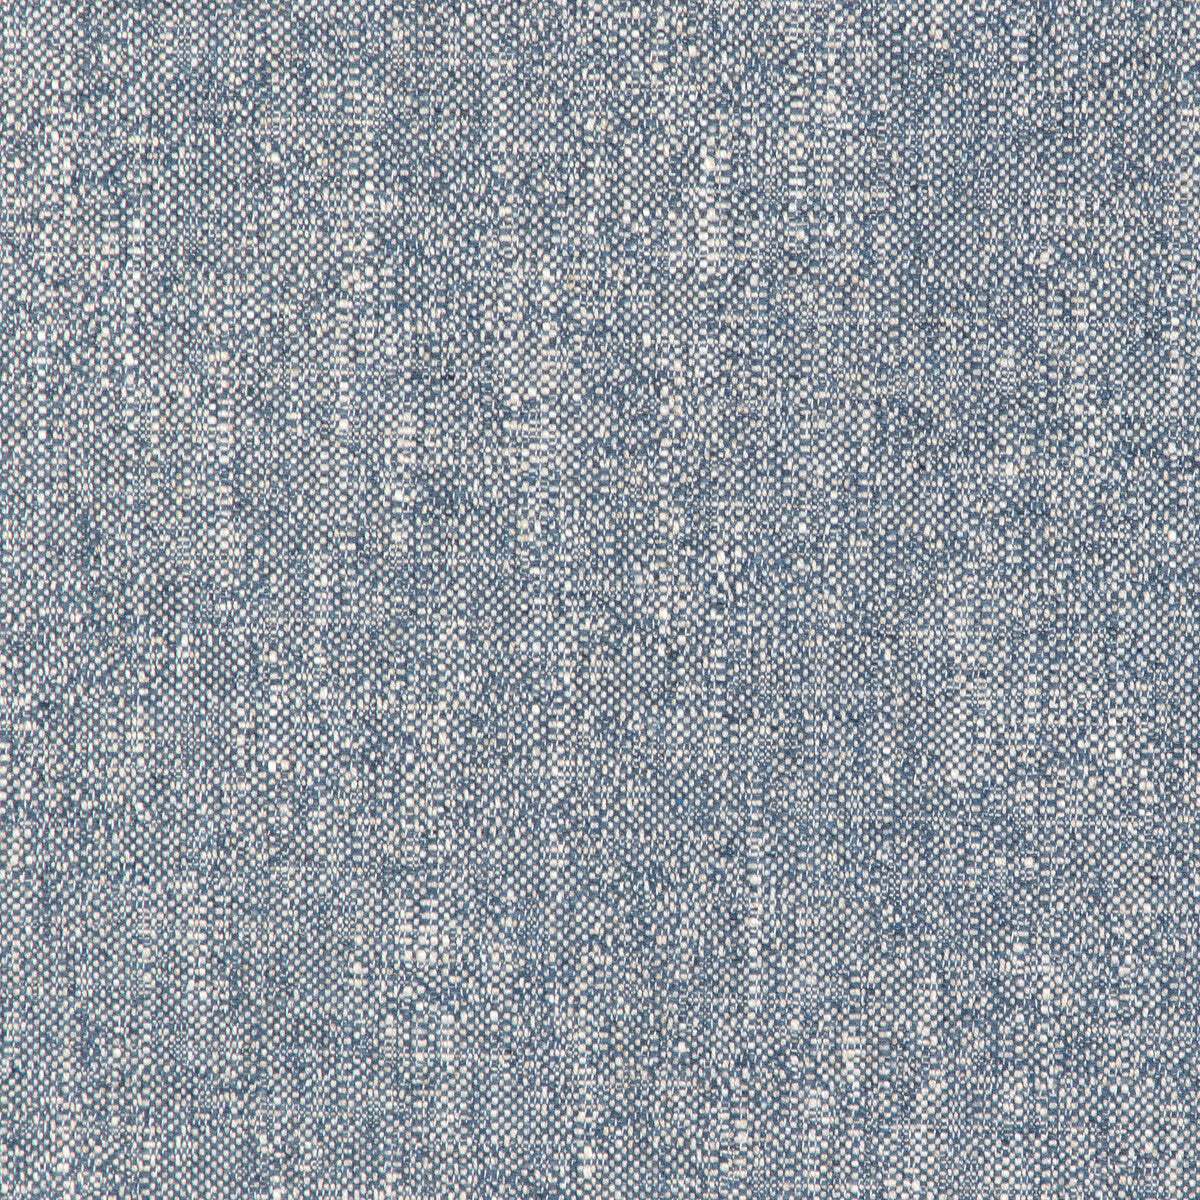 Kravet Design fabric in 36968-516 color - pattern 36968.516.0 - by Kravet Design in the Sustainable Textures II collection